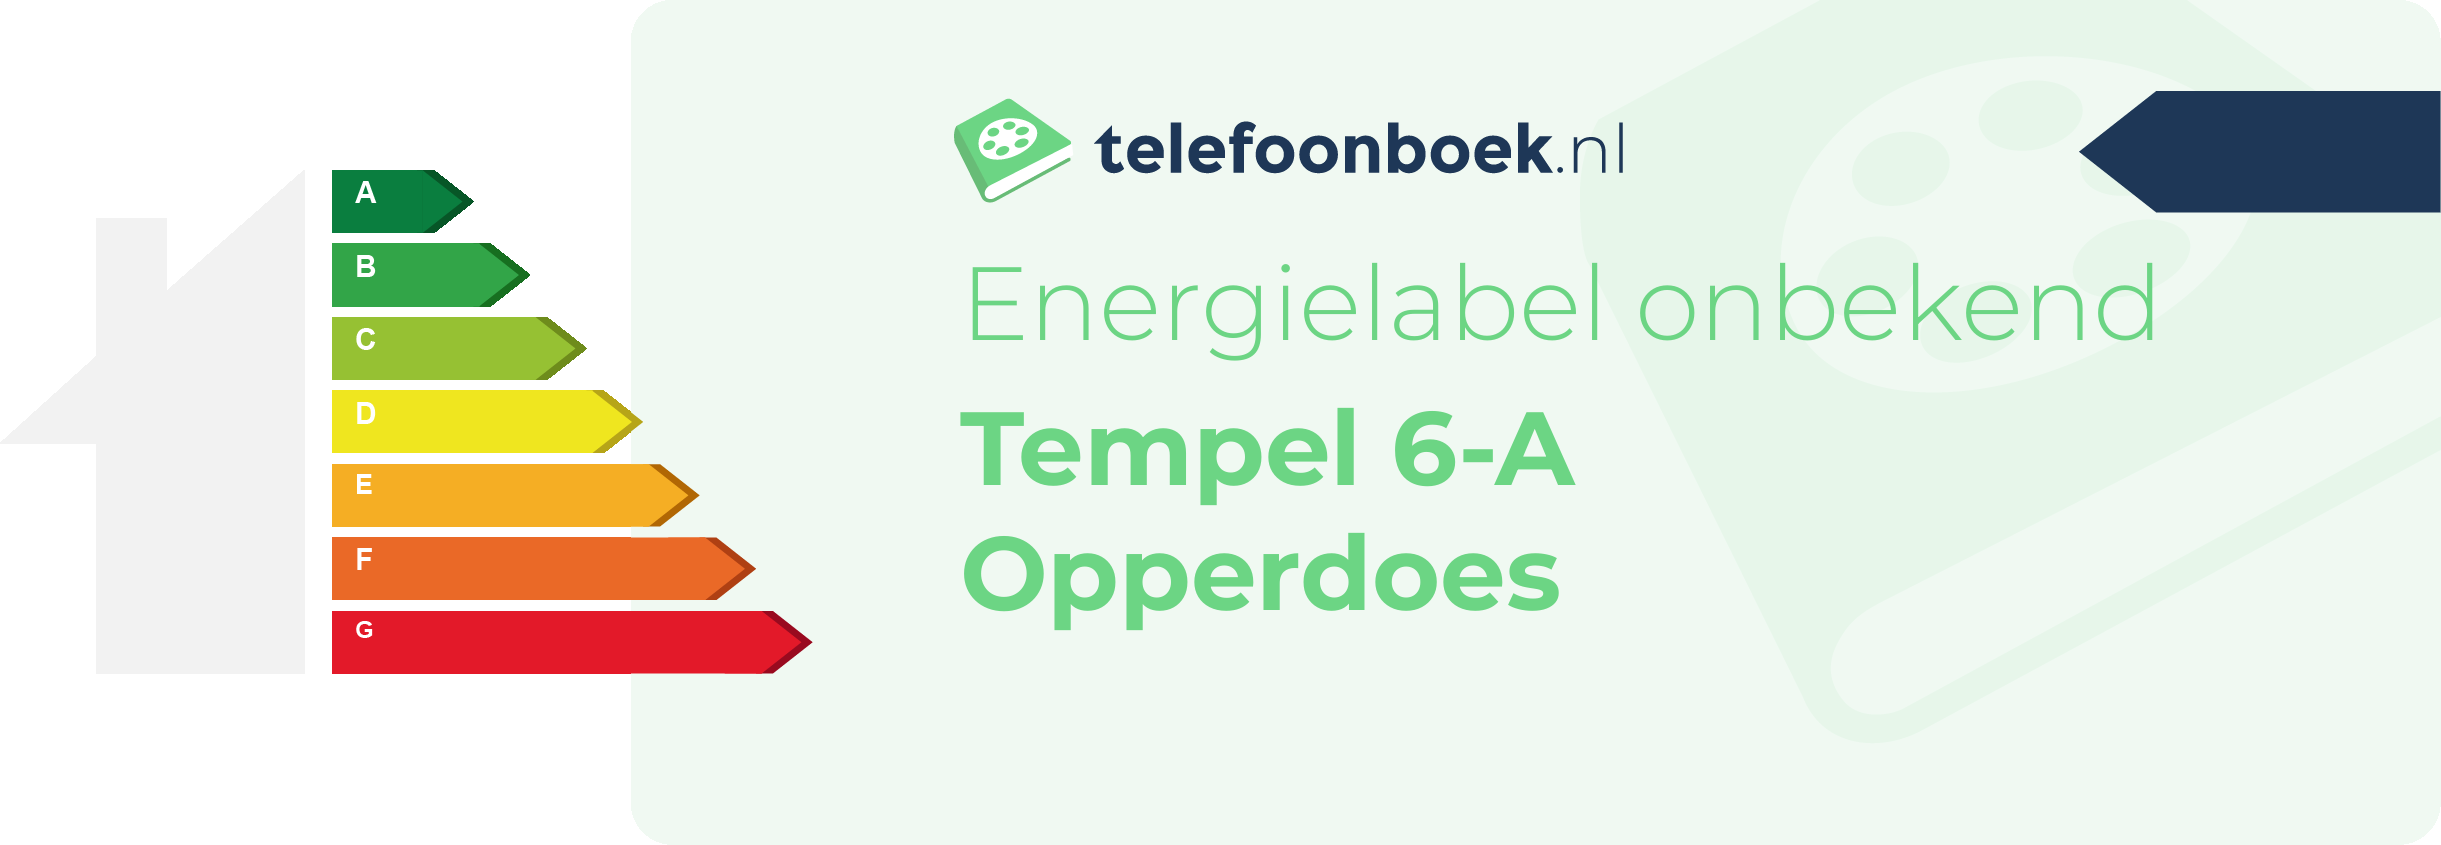 Energielabel Tempel 6-A Opperdoes